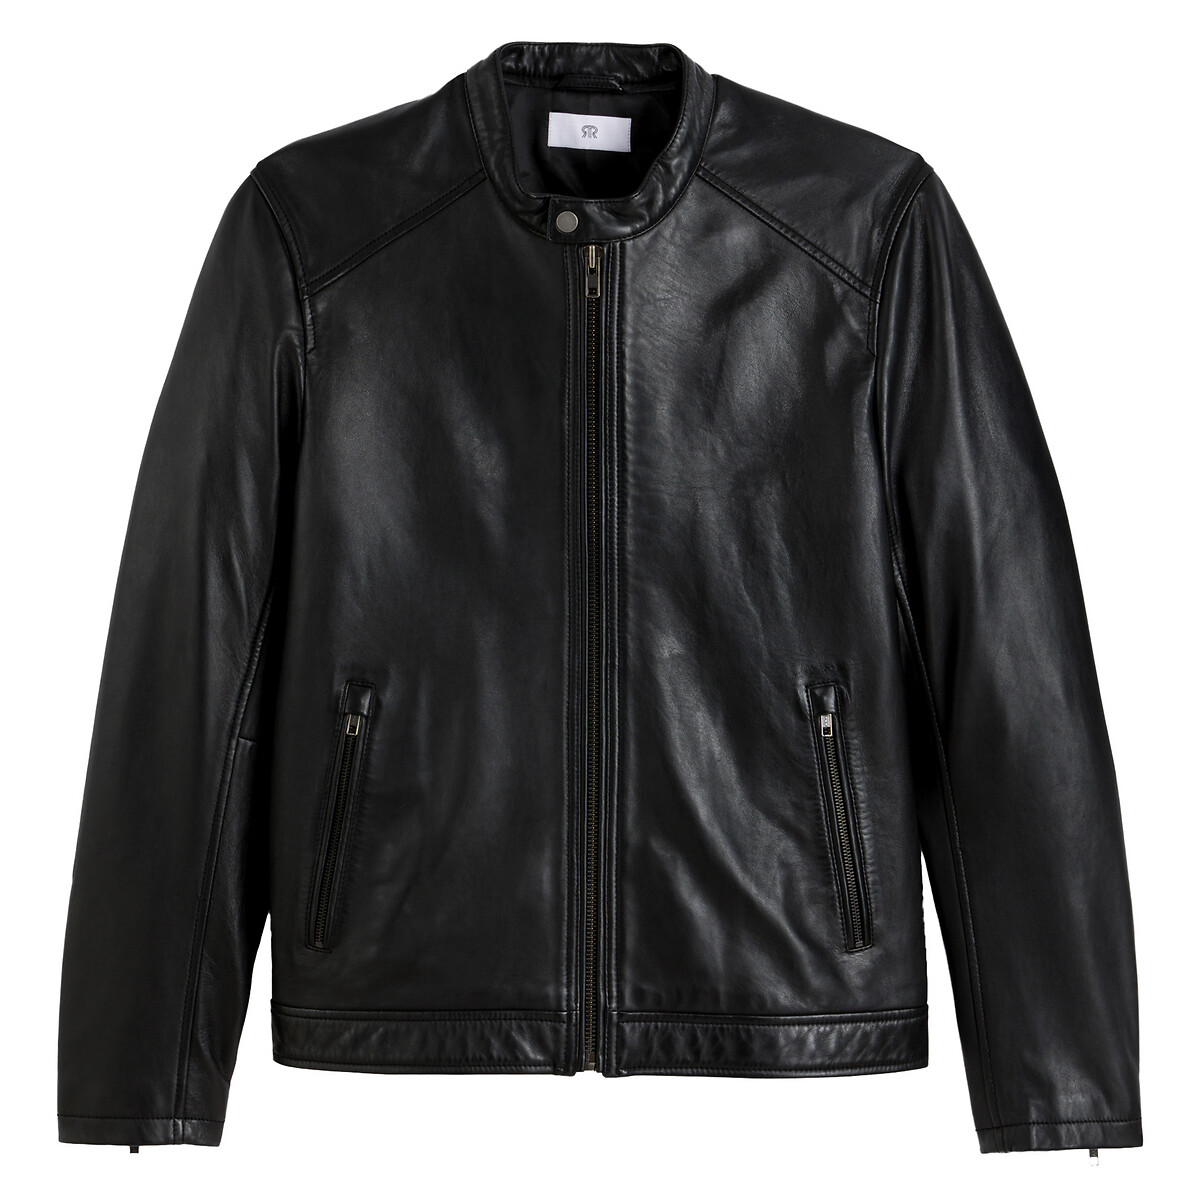 Leather bomber jacket black La Redoute Collections | La Redoute